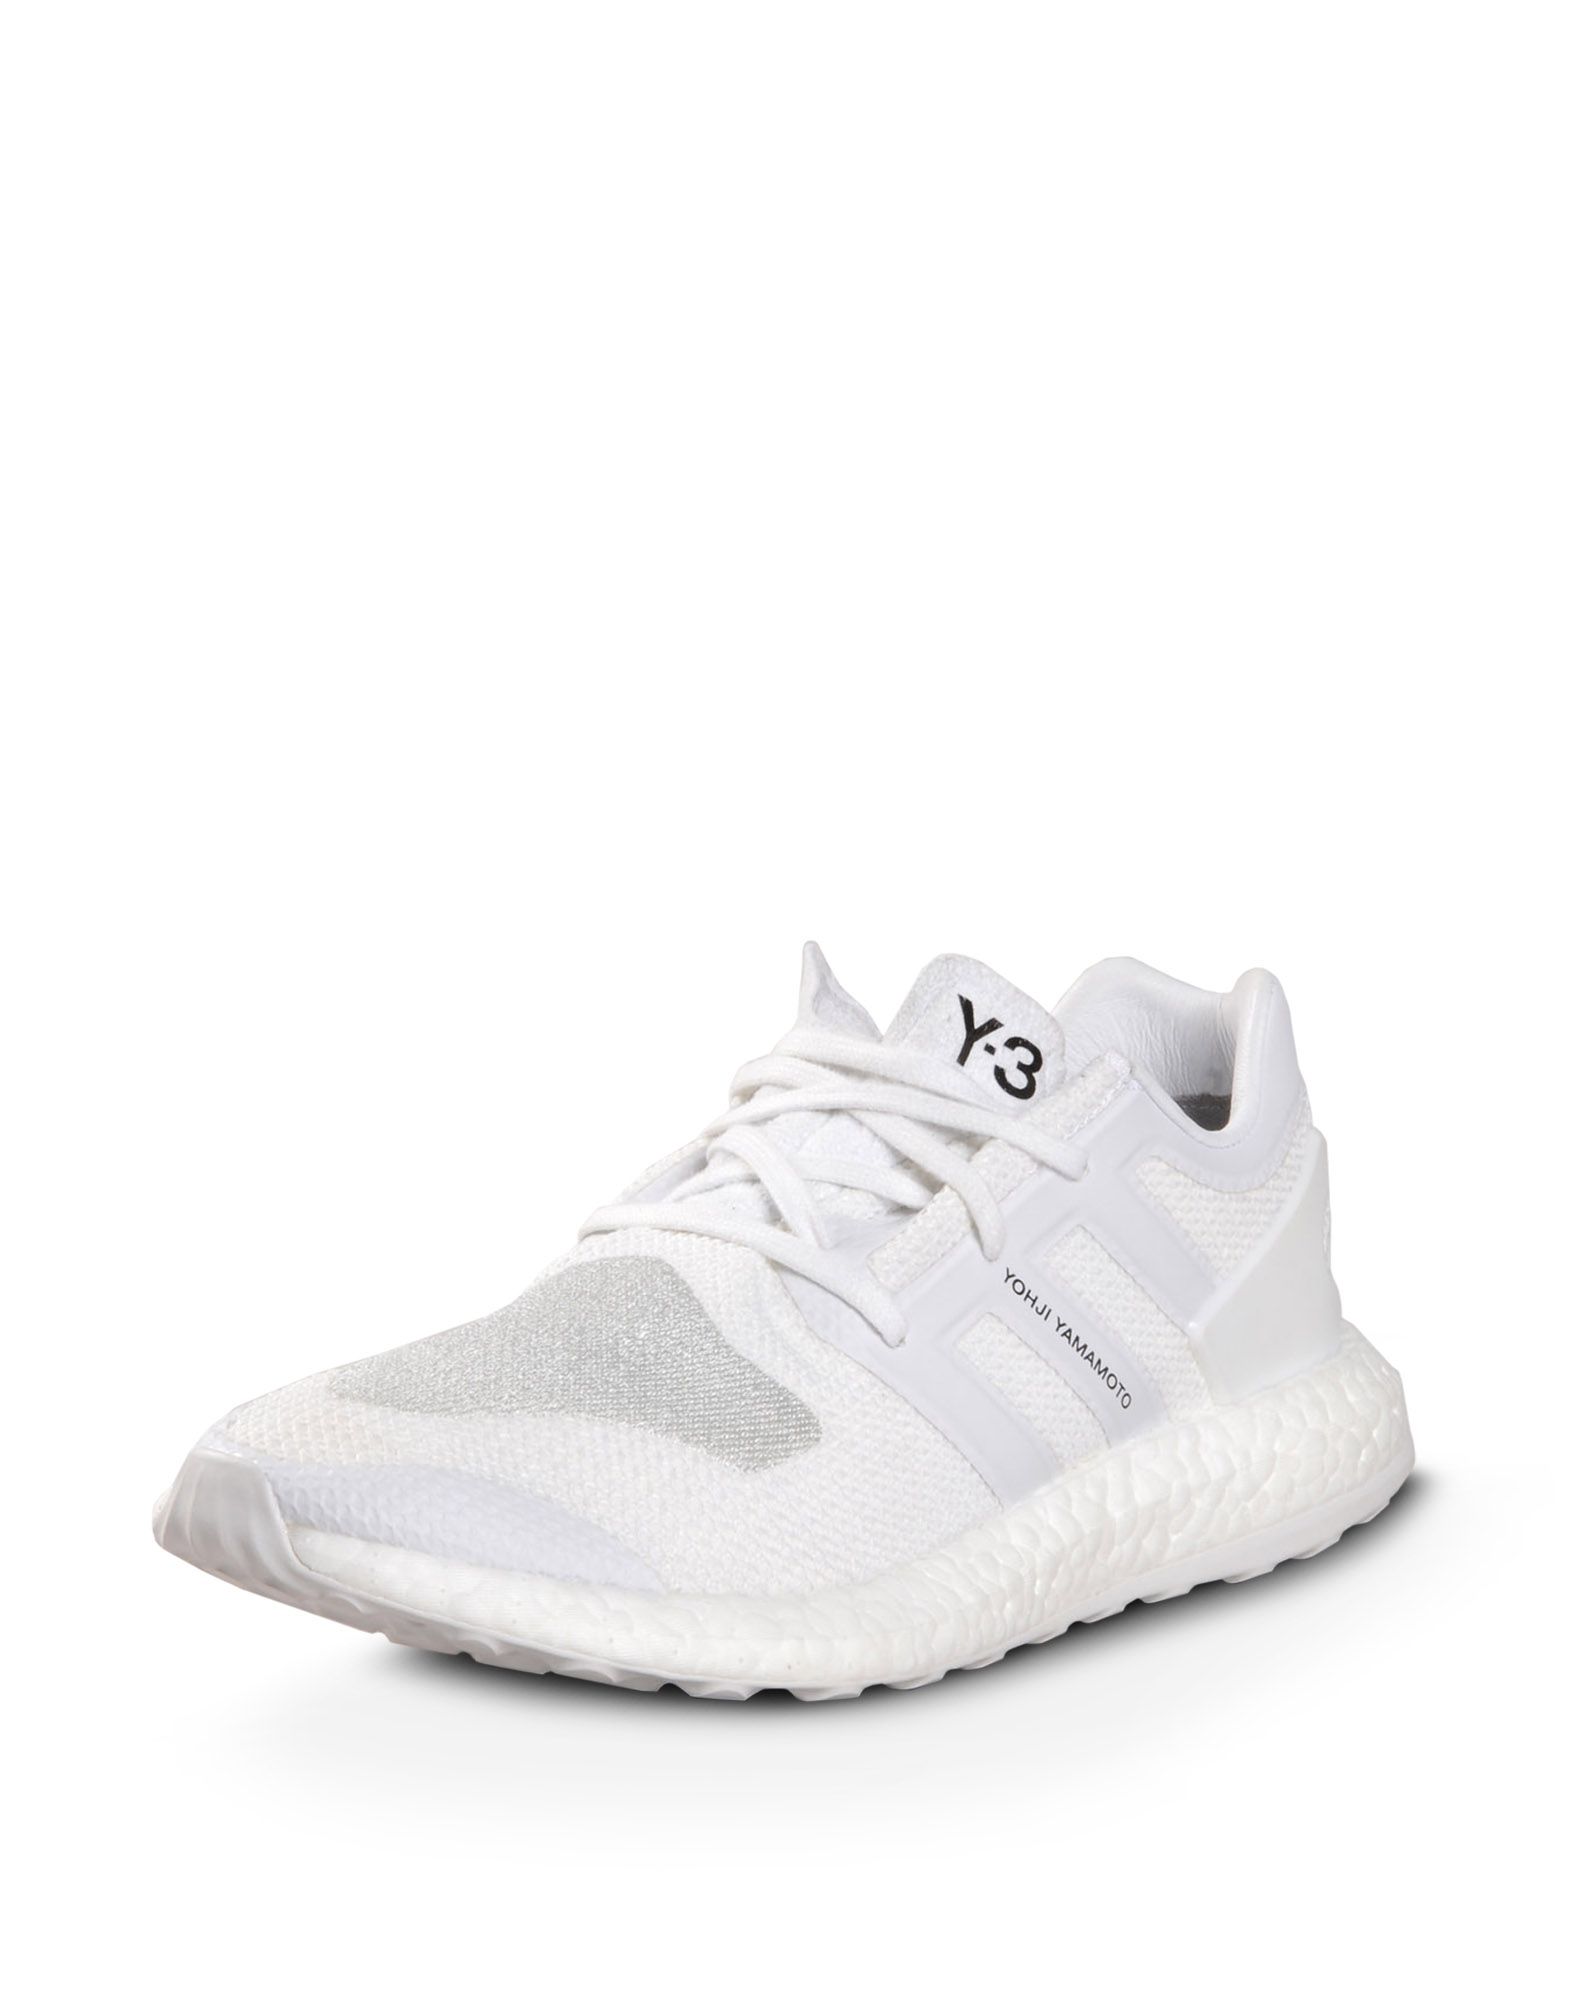 adidas y3 pure boost white